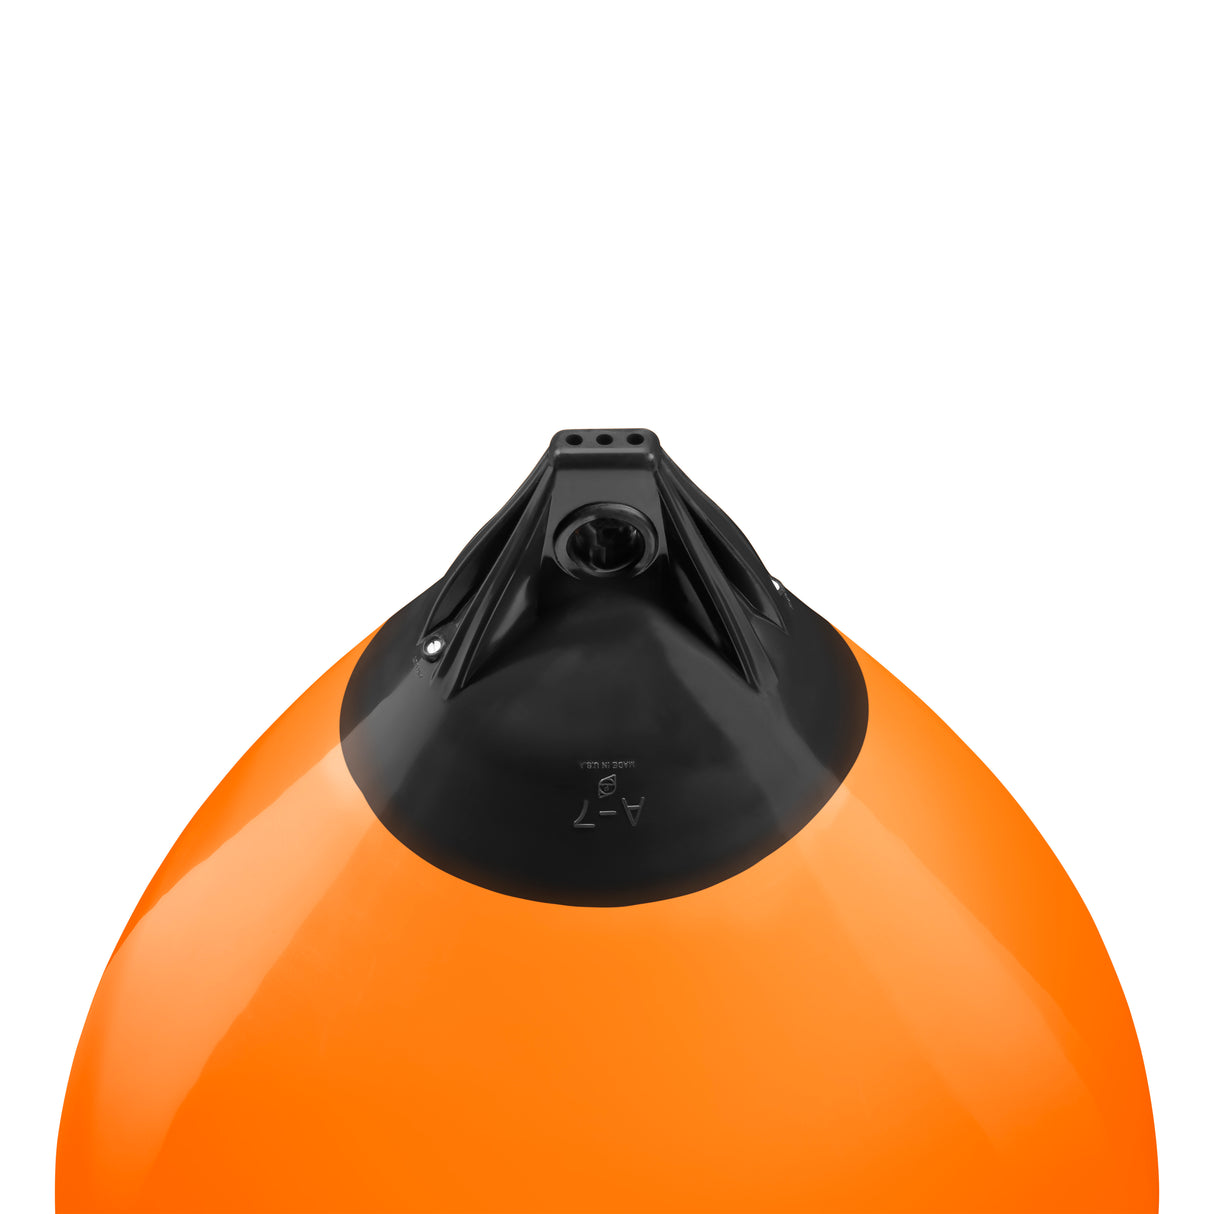 Orange buoy with Black-Top, Polyform A-7 angled shot